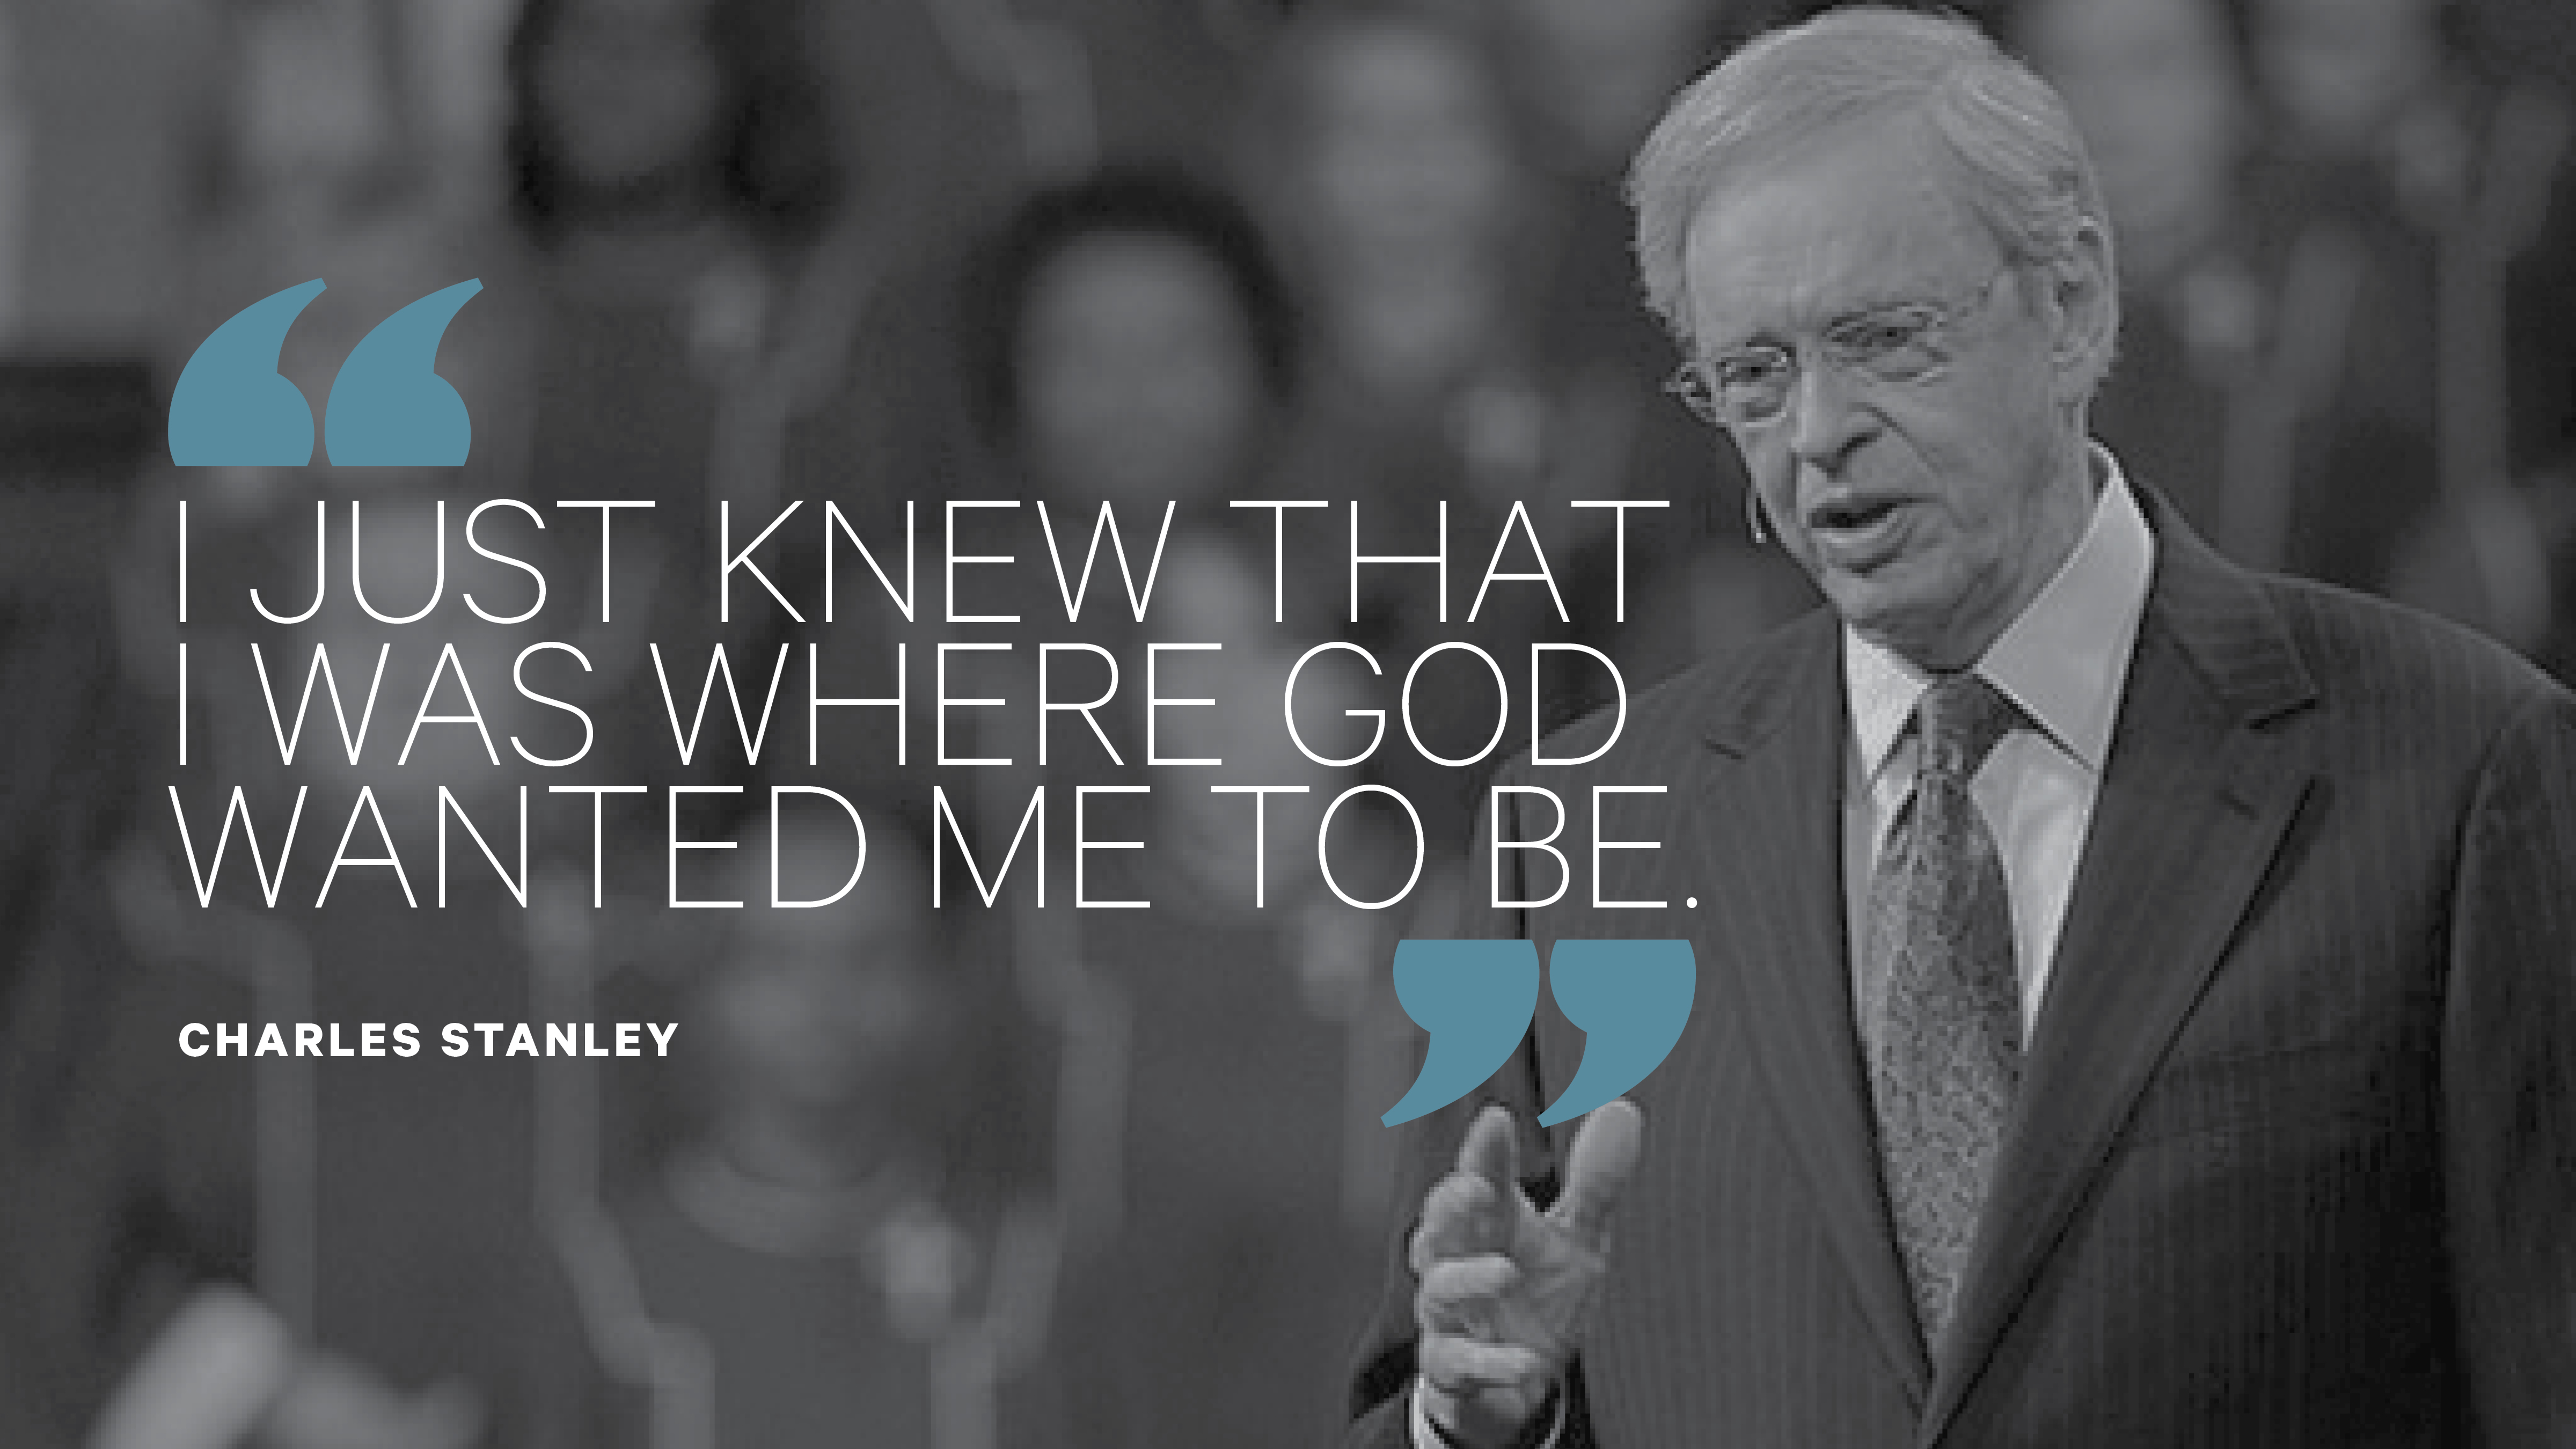 When Charles Stanley S Marriage Ended Prayer Was His Lifeline Christianity Today